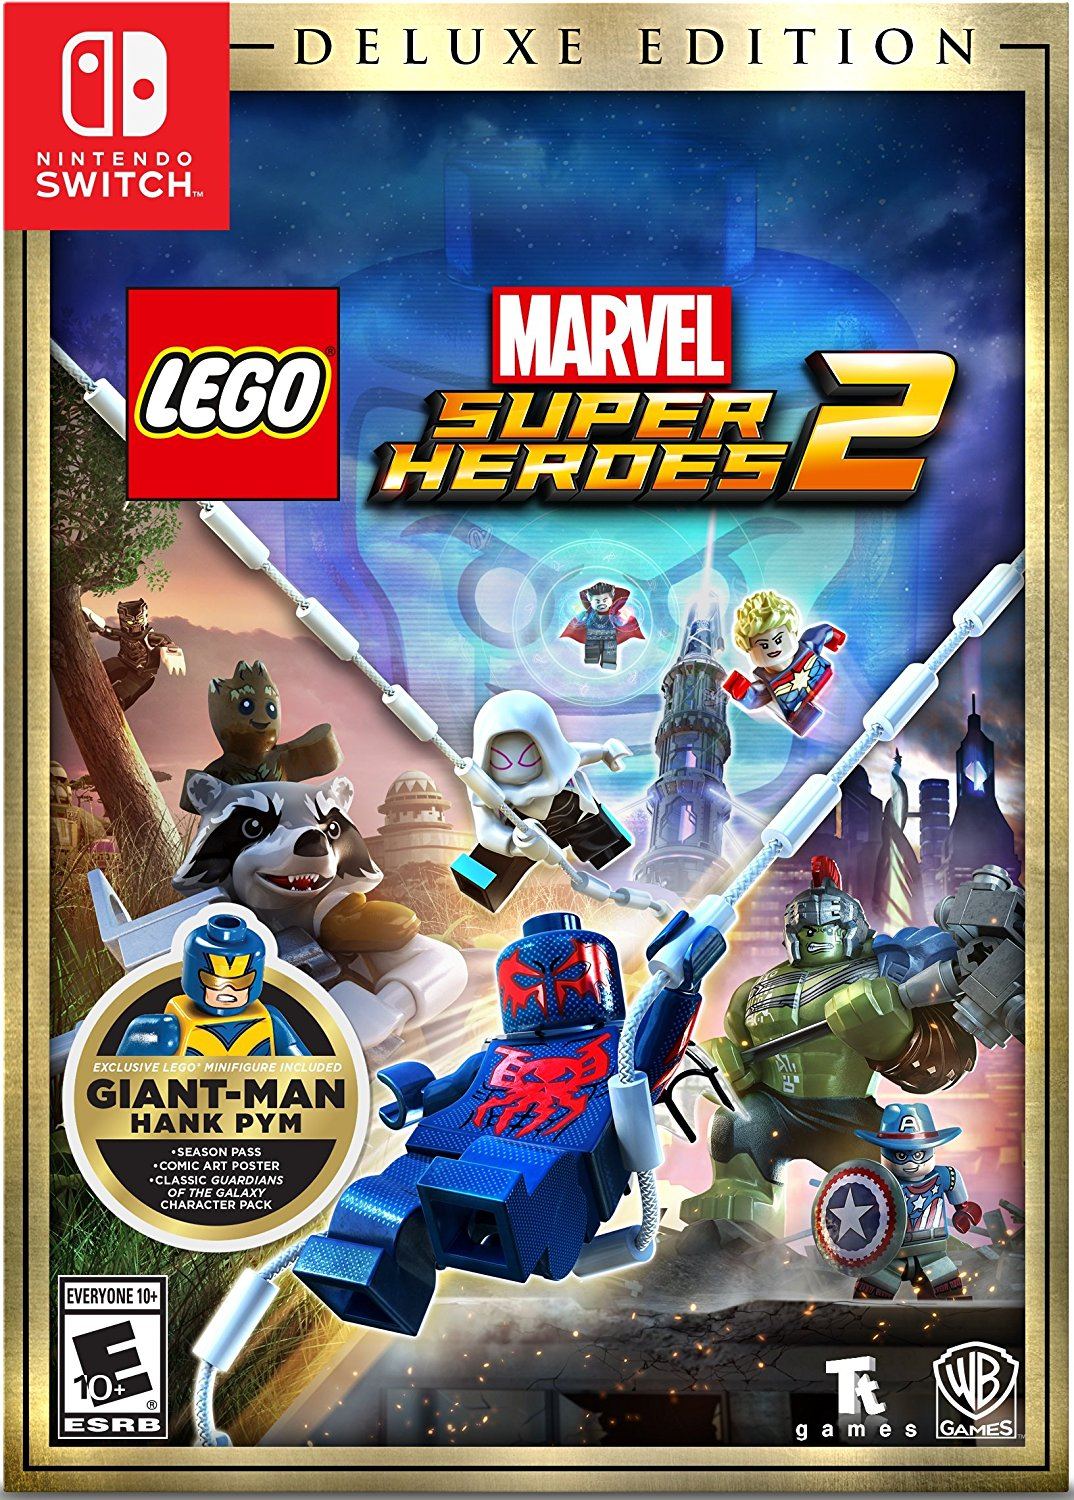 Marvel Super Heroes 2 [Deluxe Edition] for Nintendo